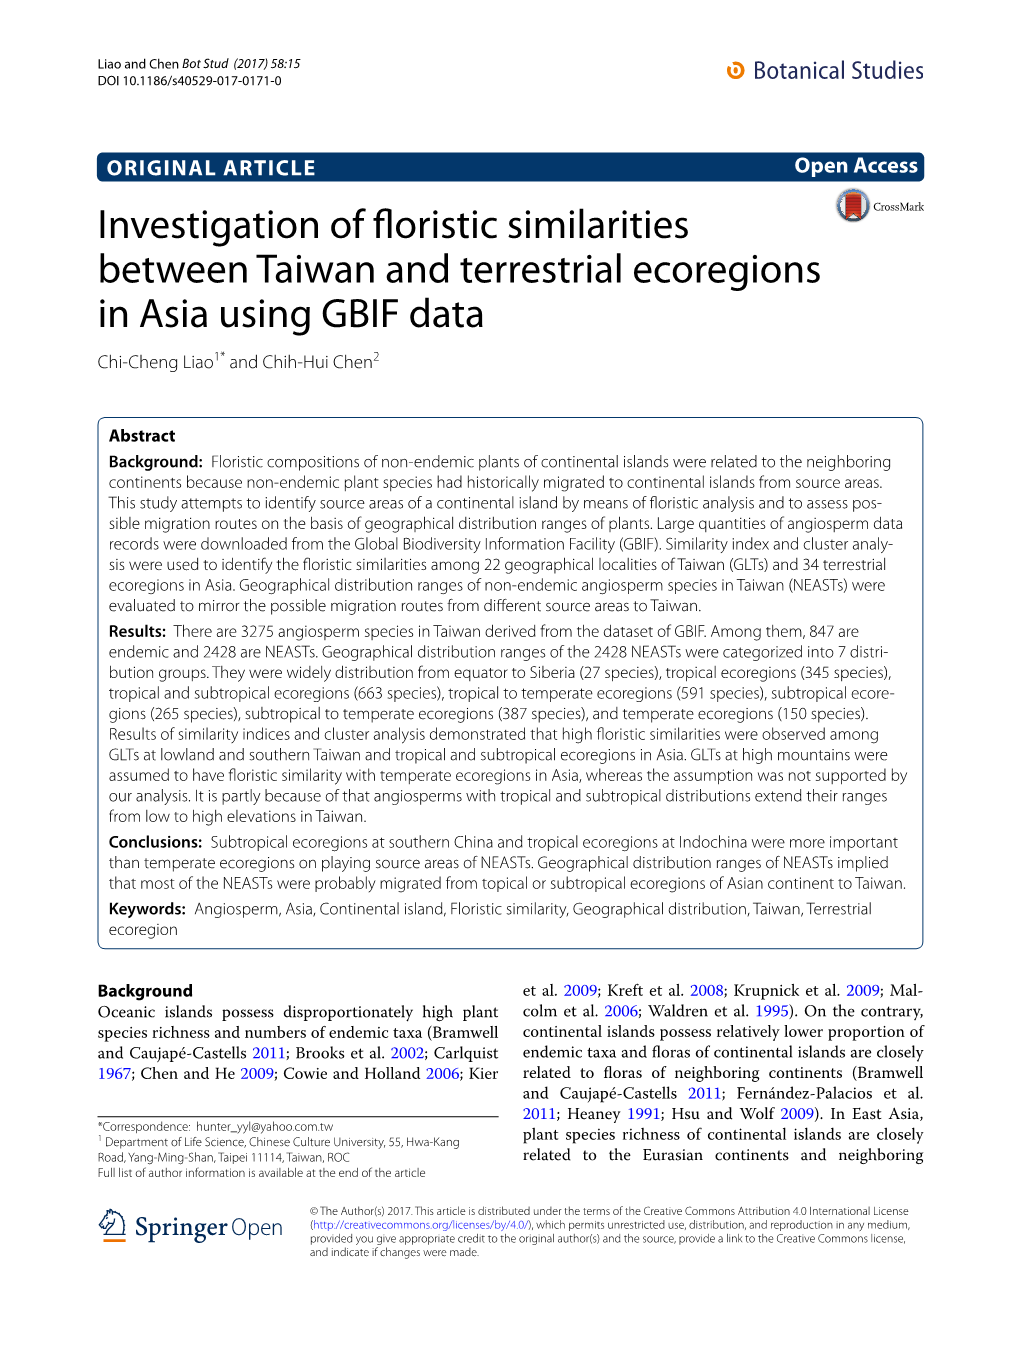 Investigation of Floristic Similarities Between Taiwan and Terrestrial Ecoregions in Asia Using GBIF Data Chi‑Cheng Liao1* and Chih‑Hui Chen2